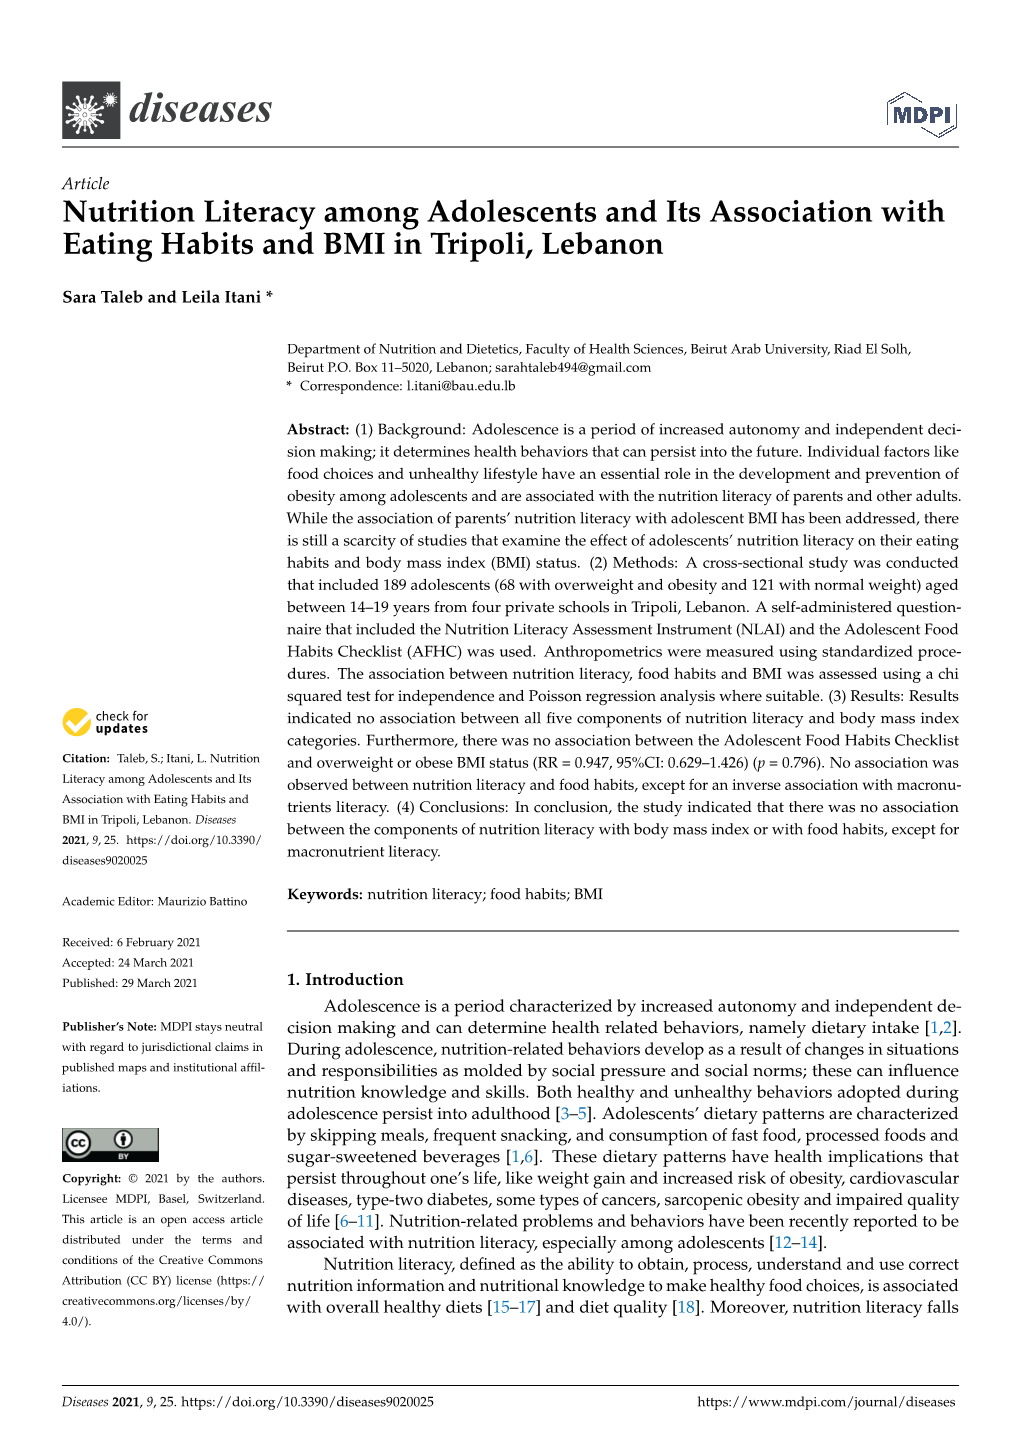 Nutrition Literacy Among Adolescents and Its Association with Eating Habits and BMI in Tripoli, Lebanon